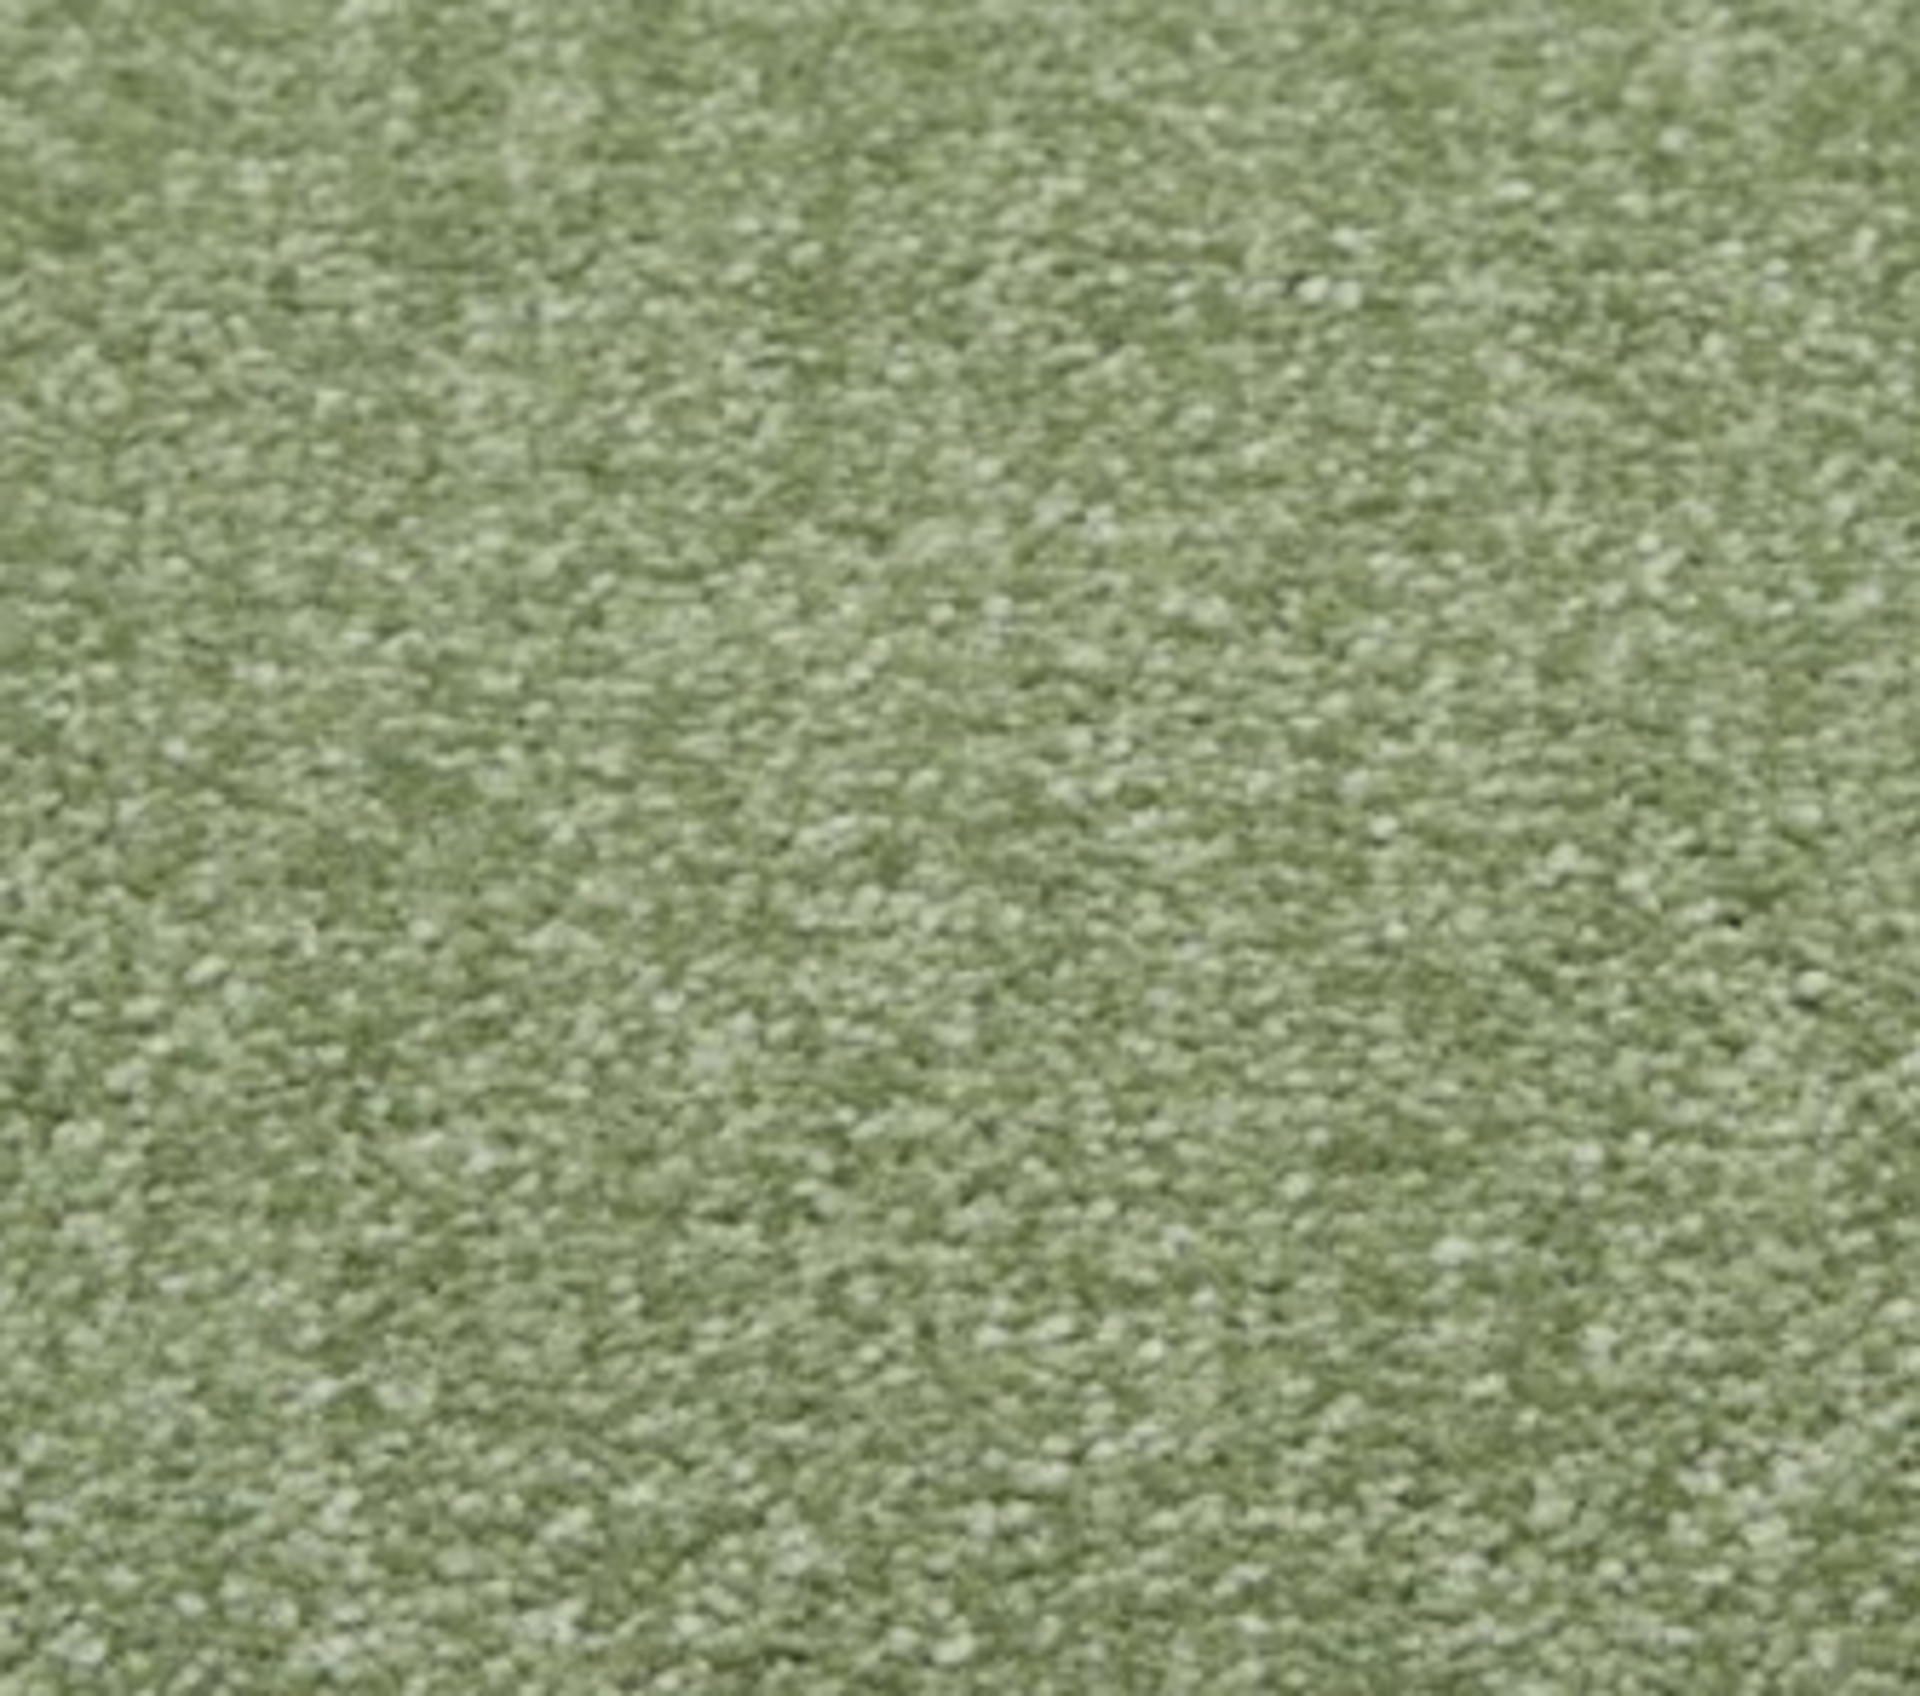 RRP £200 Bagged And Rolled Burford Green 4M X 3.16M Carpet (137982)